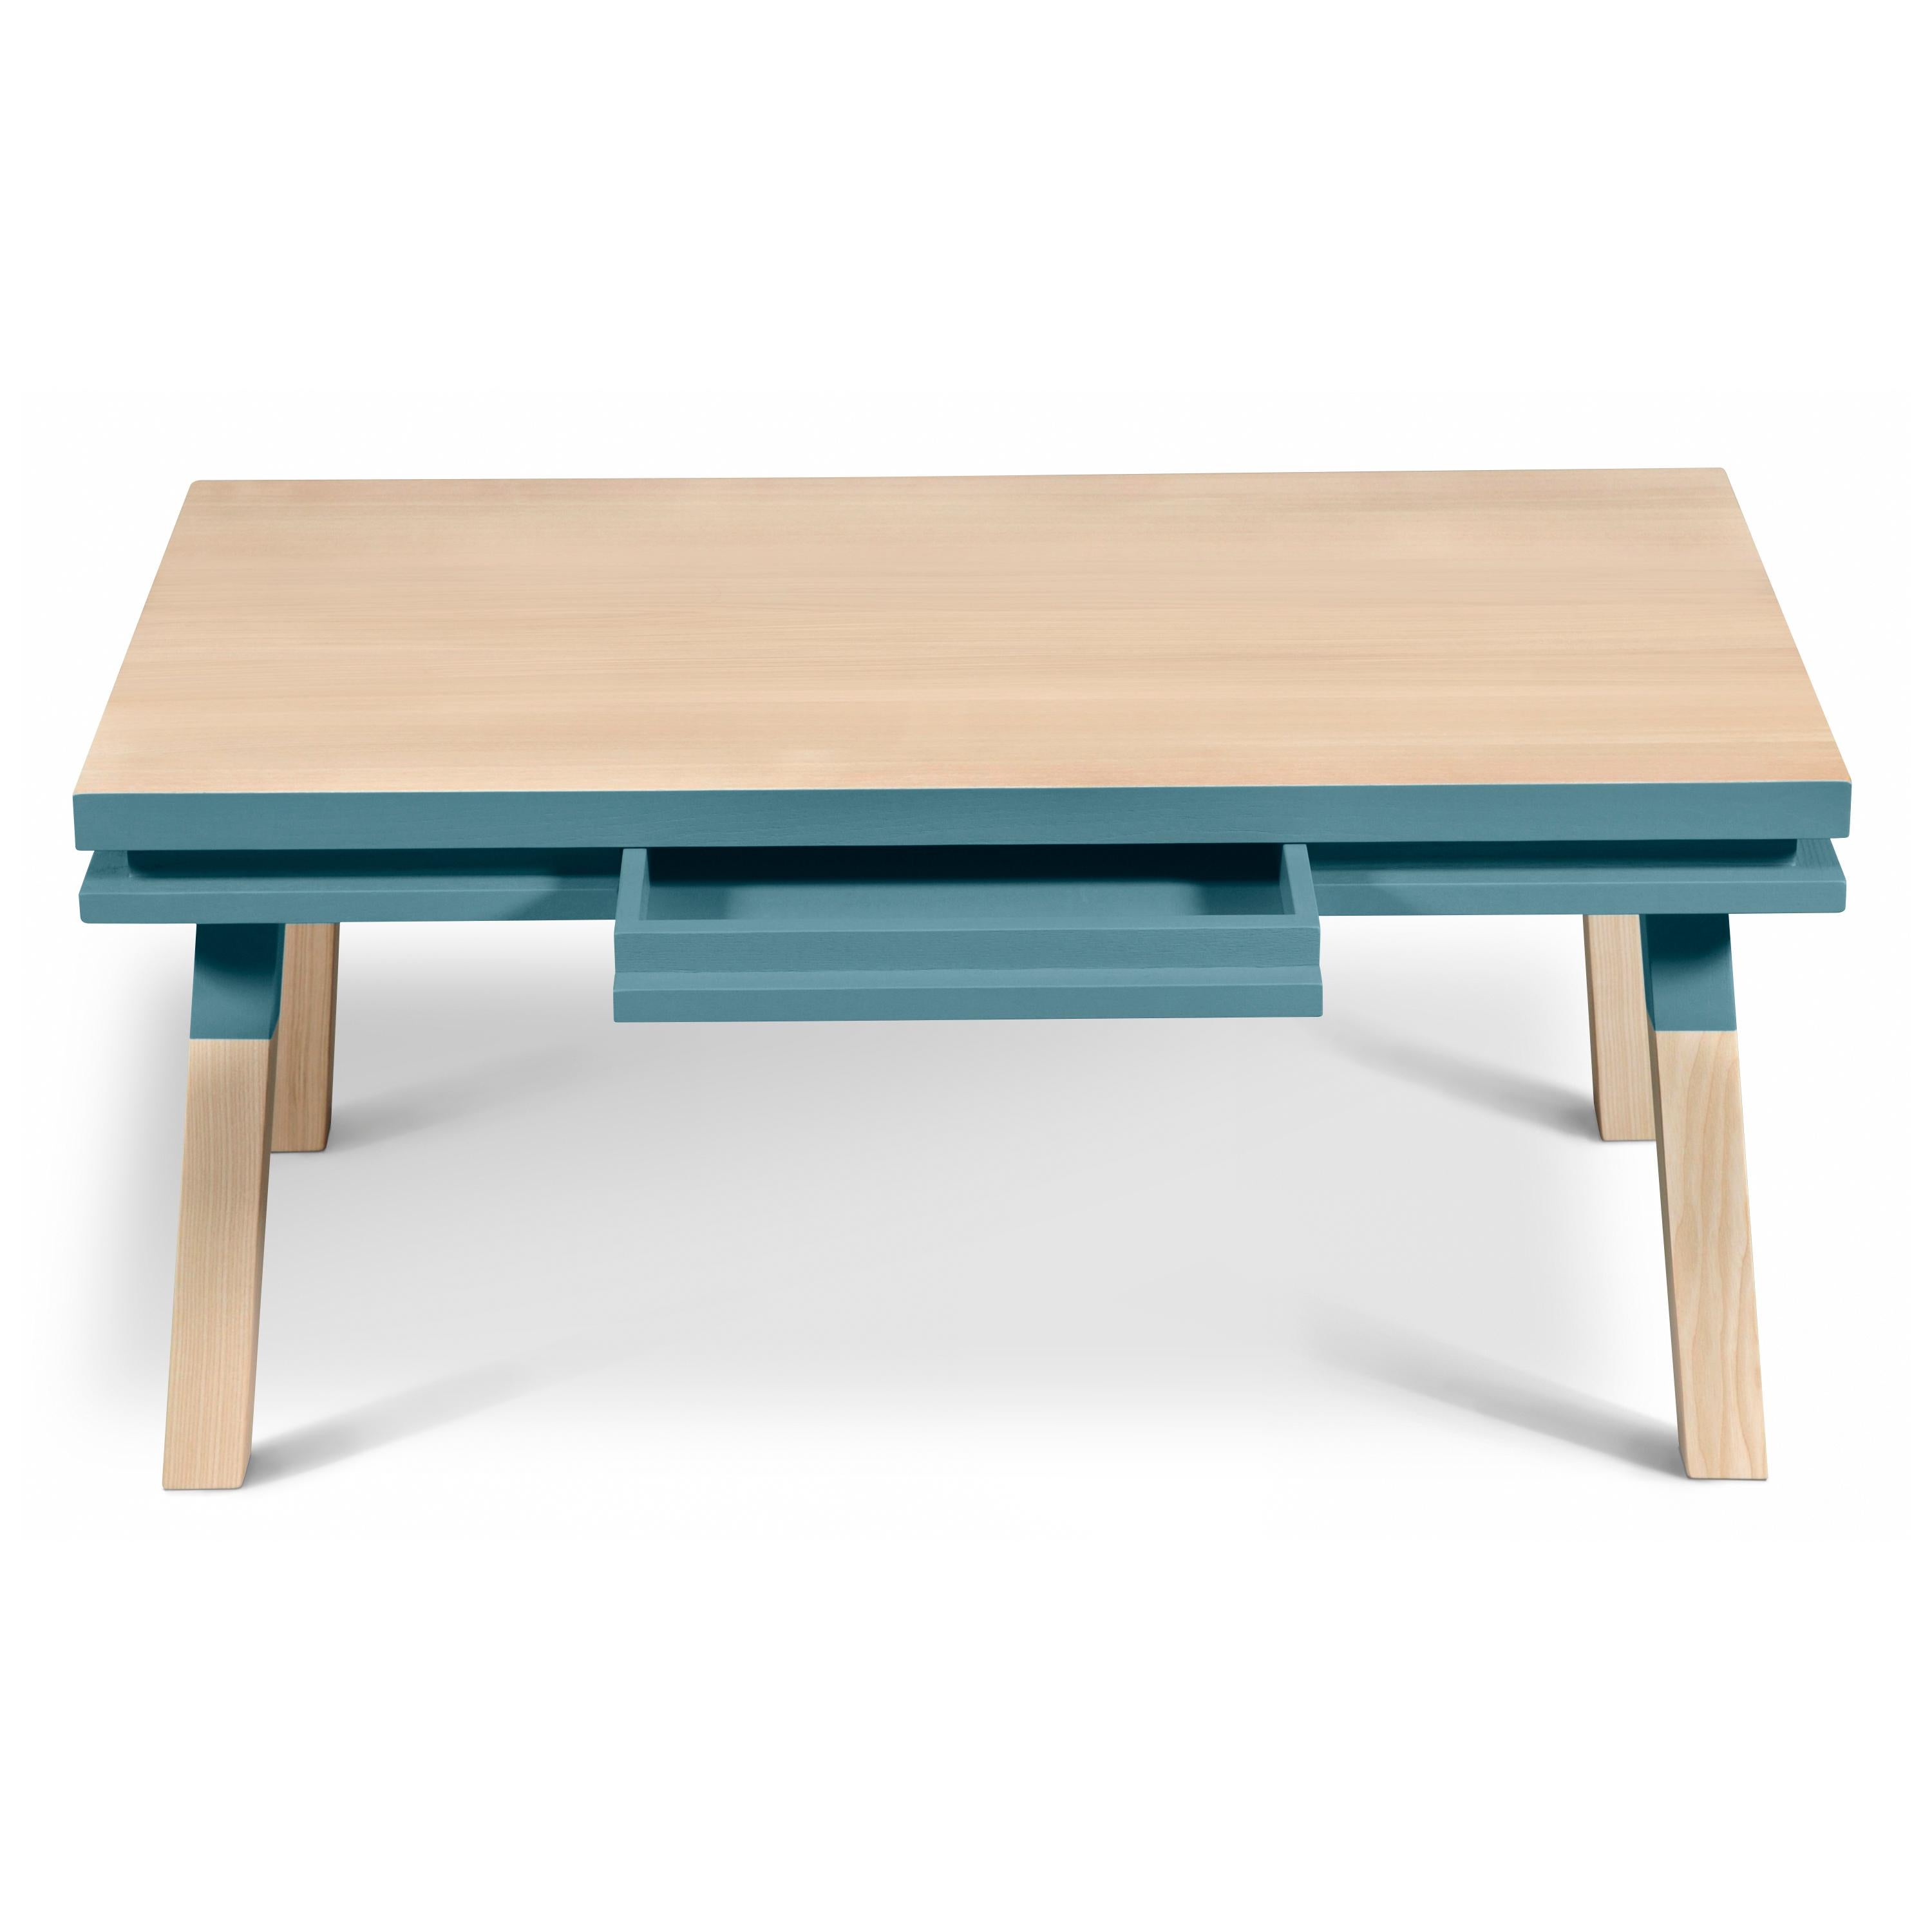 Rectangular coffee table made of 100% solid ash wood from sustainably managed French Forests

1 wooden drawer is integrated into the belt

This piece of furniture is part of the ÉGÉE collection, designed by the Parisian designer Eric GIZARD who